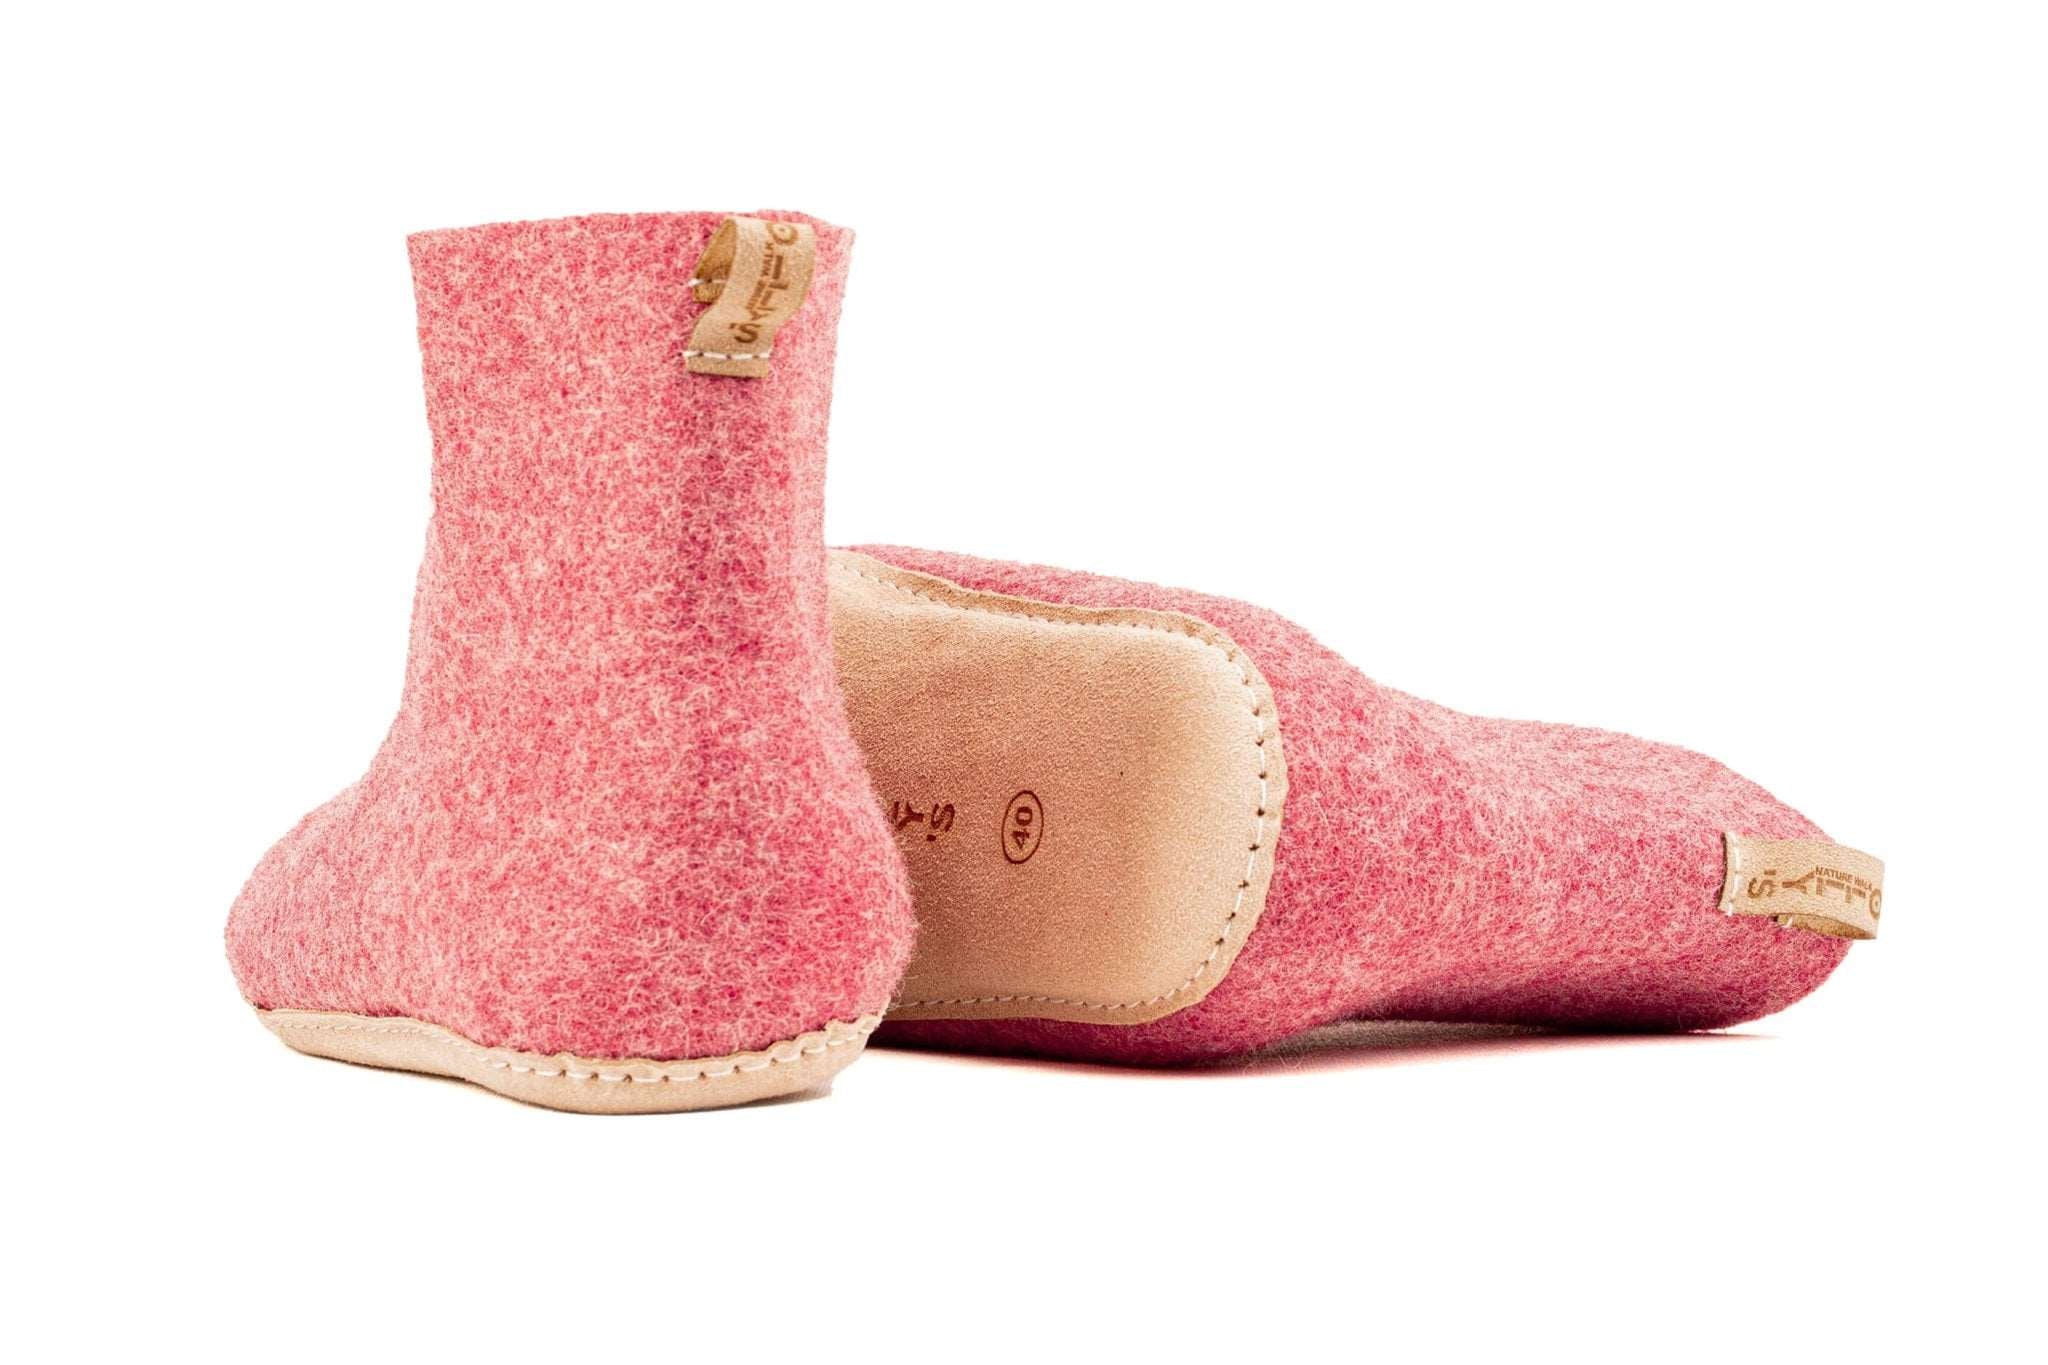 Indoor Boots With Leather Sole - Cherry Pink - Woollyes